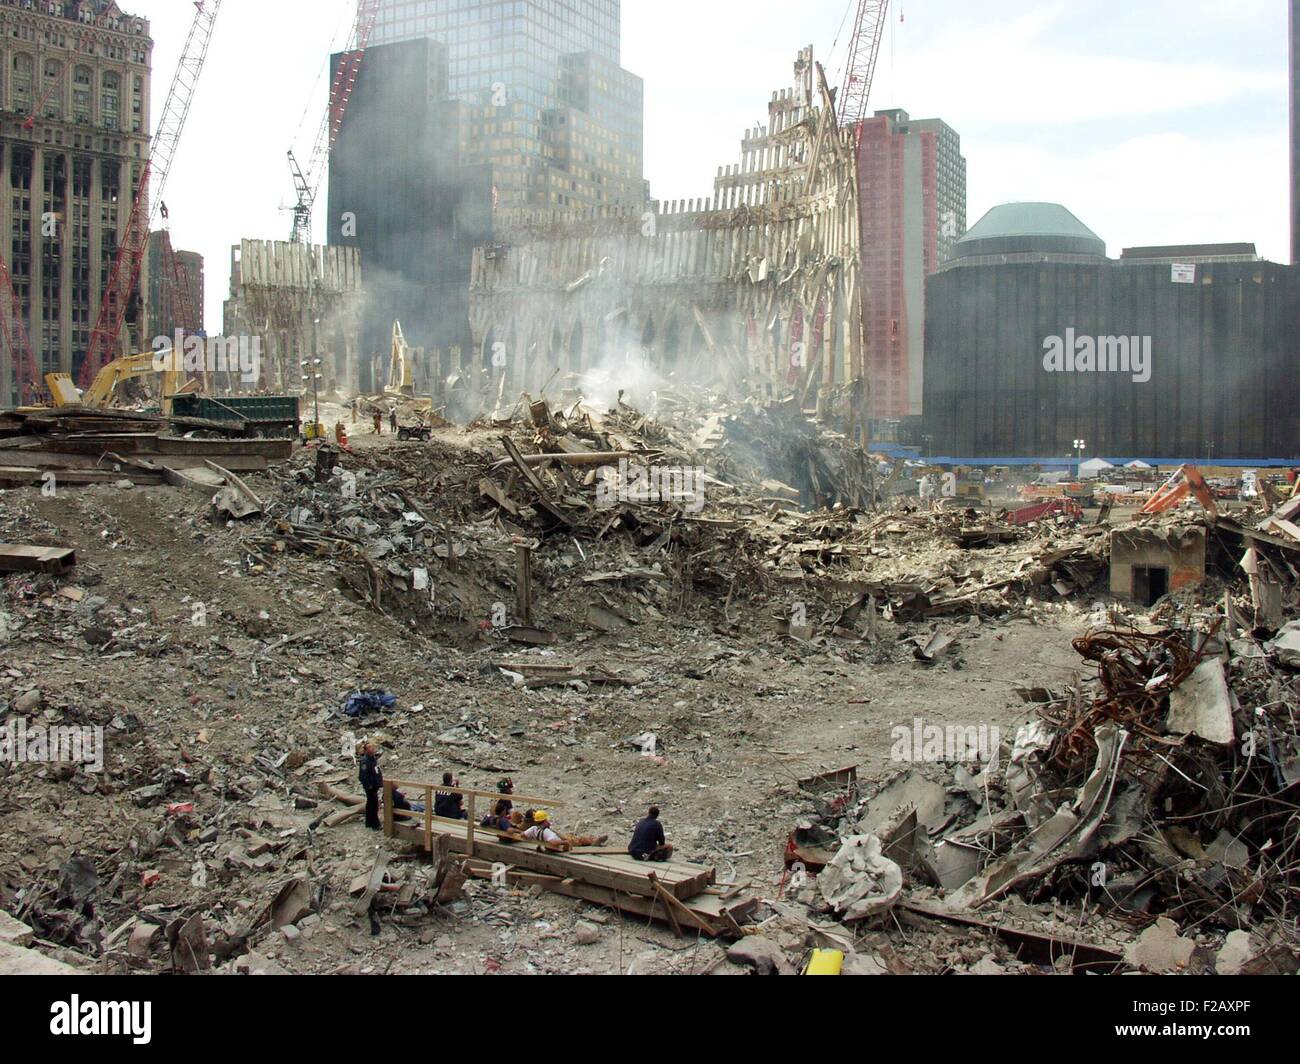 Pile of debris from the South Tower of World Trade Center a month after the terrorist attack. Oct. 10, 2001. The pile is reduced after a month of recovery operations searched for remains of the 479 firemen, police, and building workers lost when the WTC 2 collapsed. New York City, after September 11, 2001 terrorist attacks. (BSLOC 2015 2 117) Stock Photo